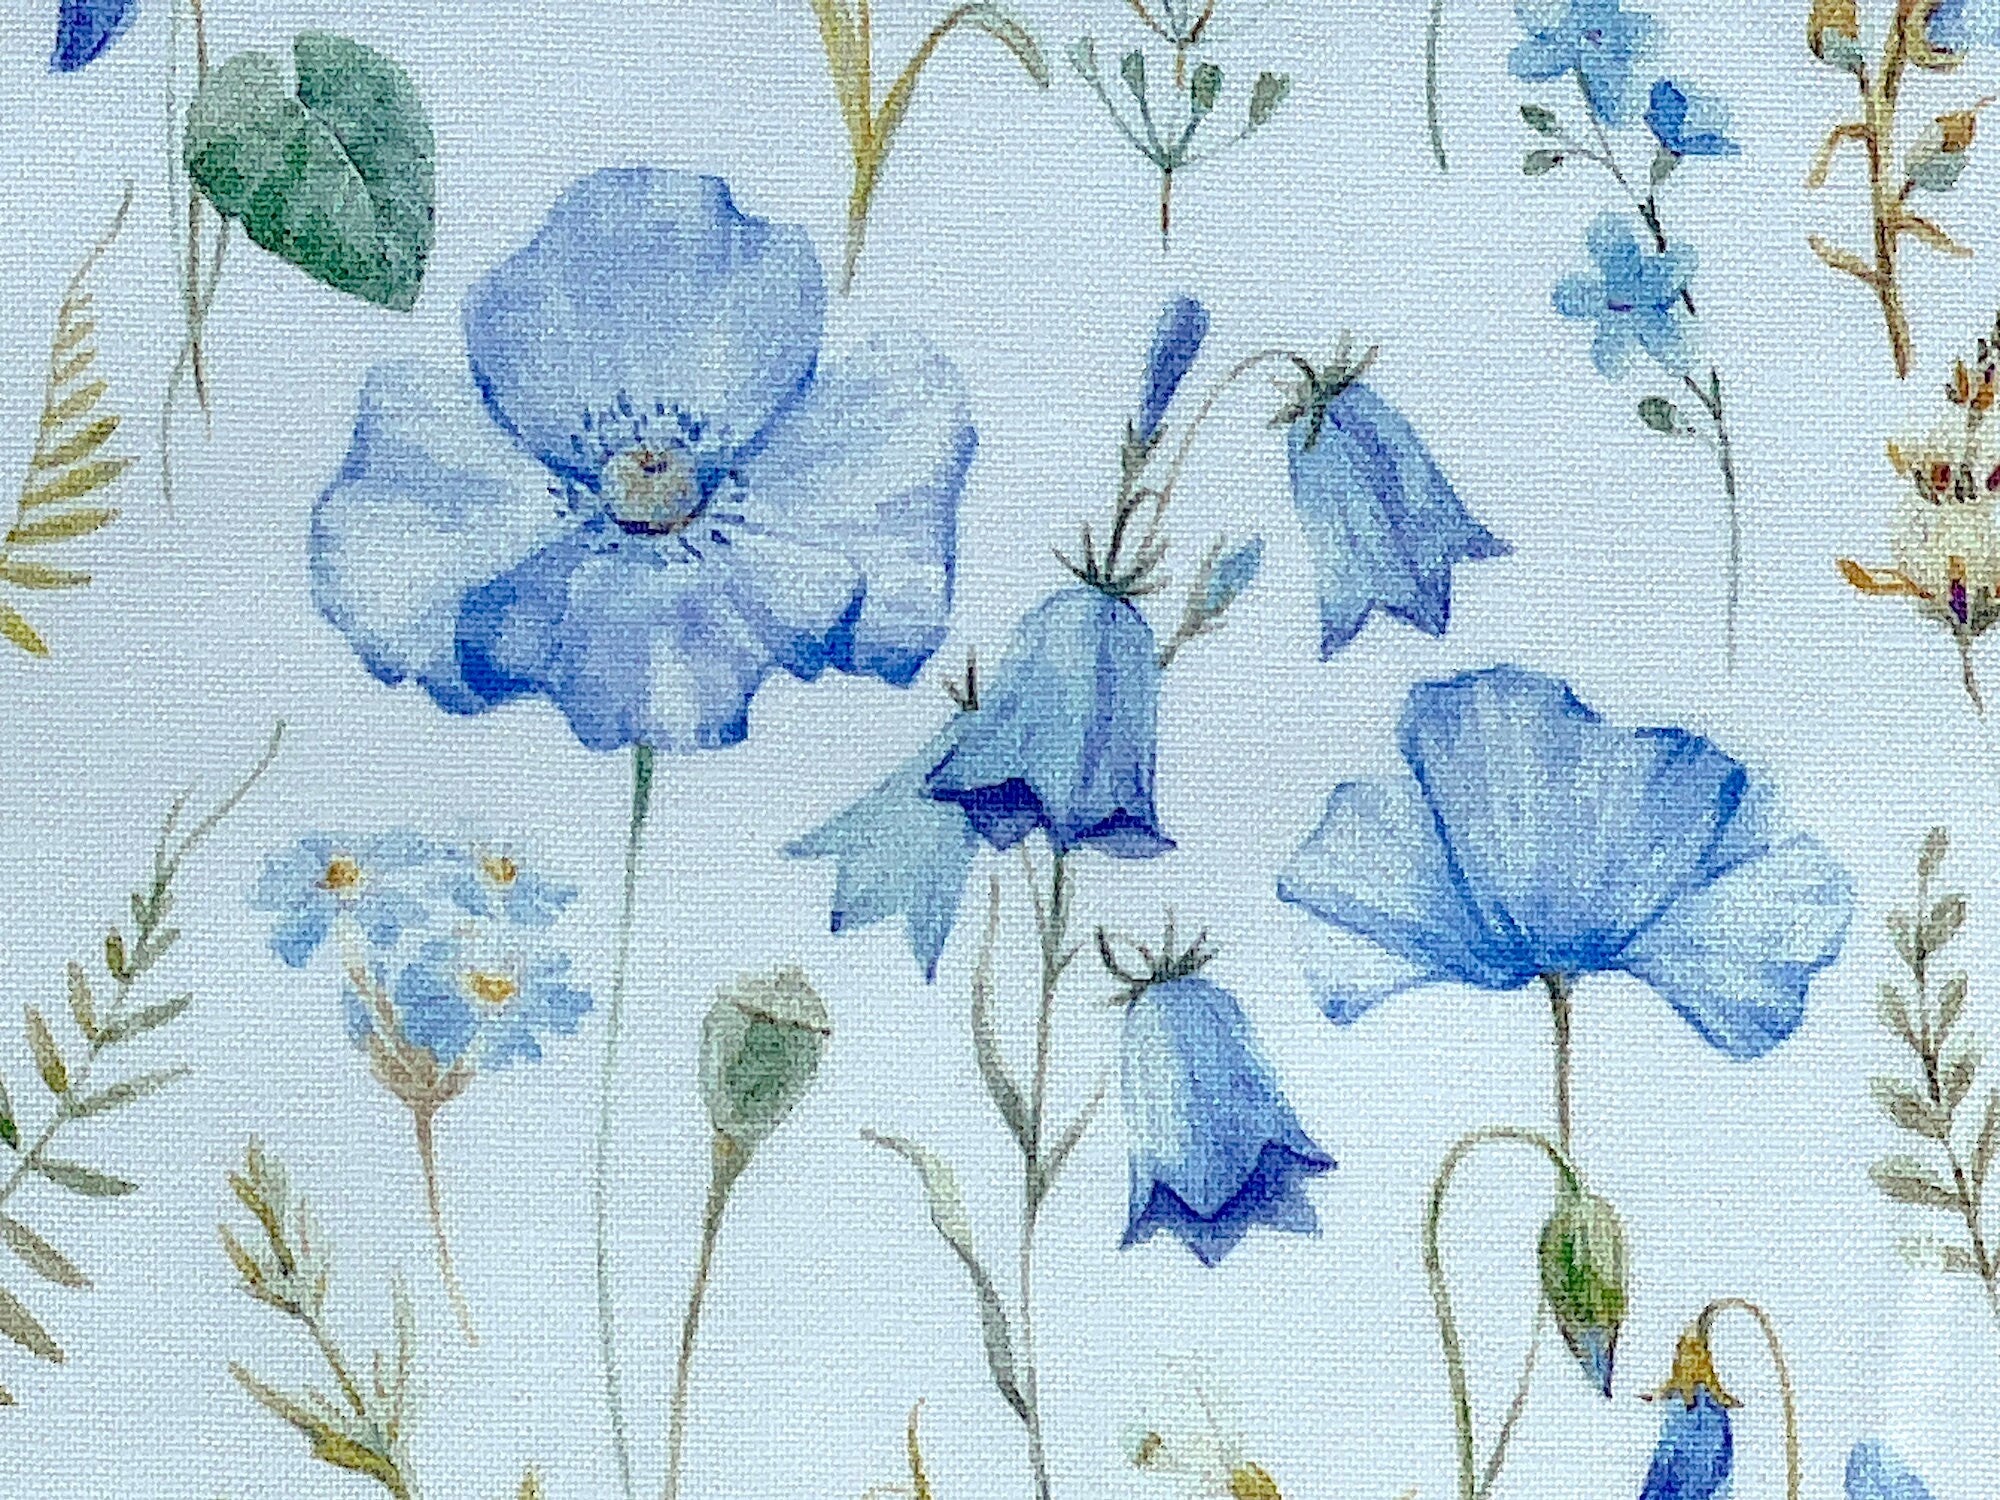 Close up of blue poppies.